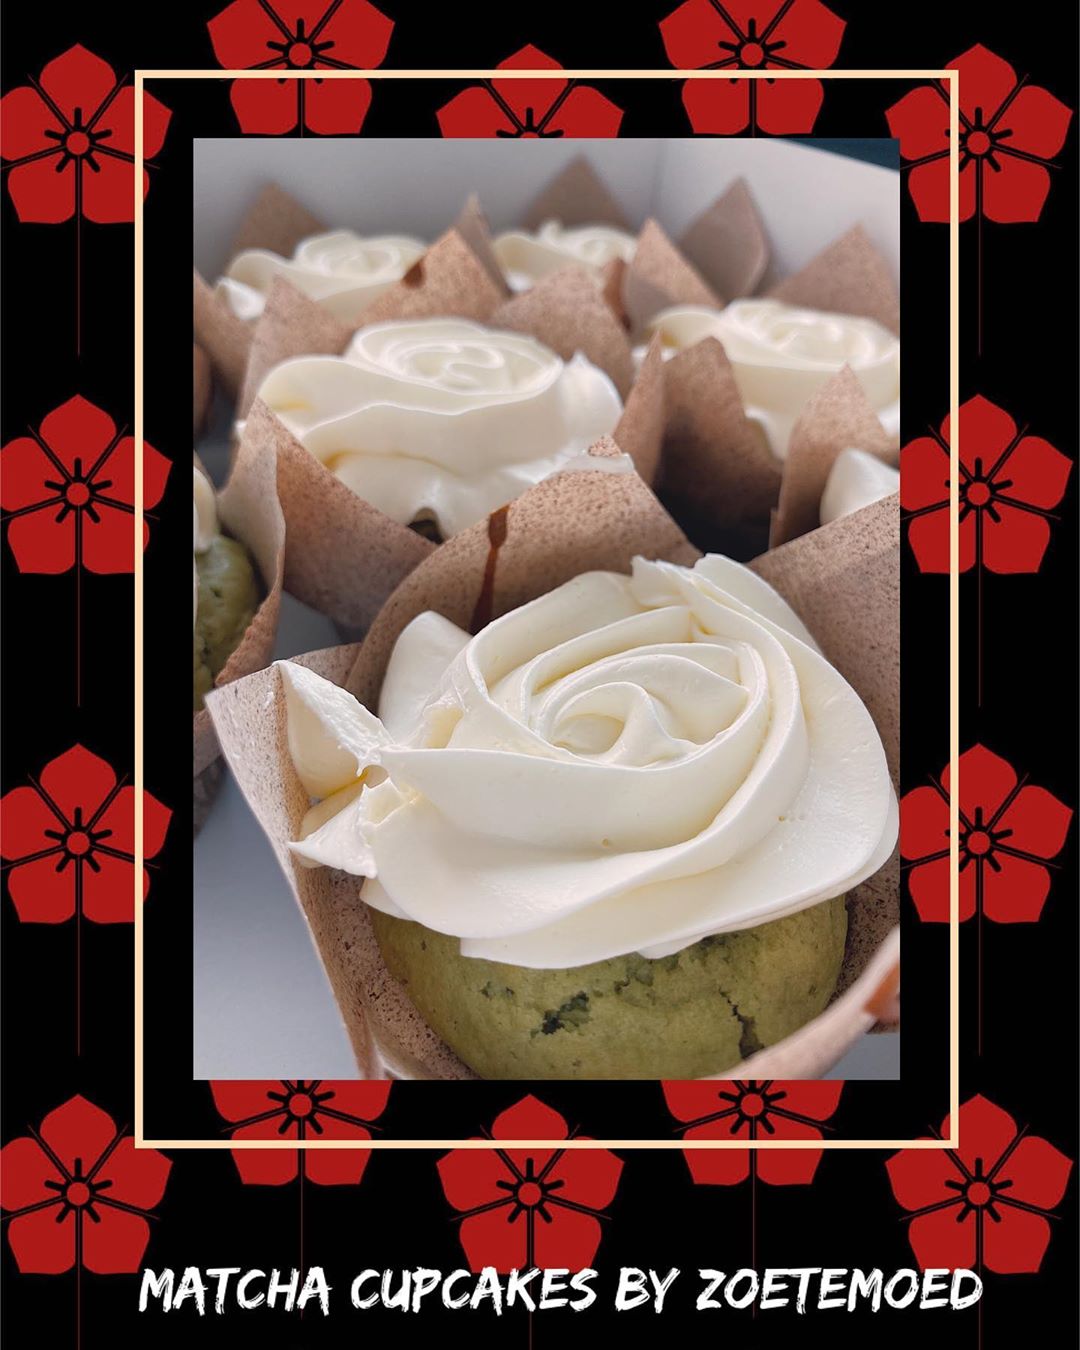 DESSERT SPECIAL – MATCHA CUPCAKE BY @ZOETEMOED ? . Get yours tomorrow with your order! .
.
.
#XuNoodleBar #Tilburg #Noodles #Asian #Chinese #Food #Hotspot #FollowUs #SendNoods #foodie #supportlocals #Zoetemoed #cupcake #dessert #waartilburgeet